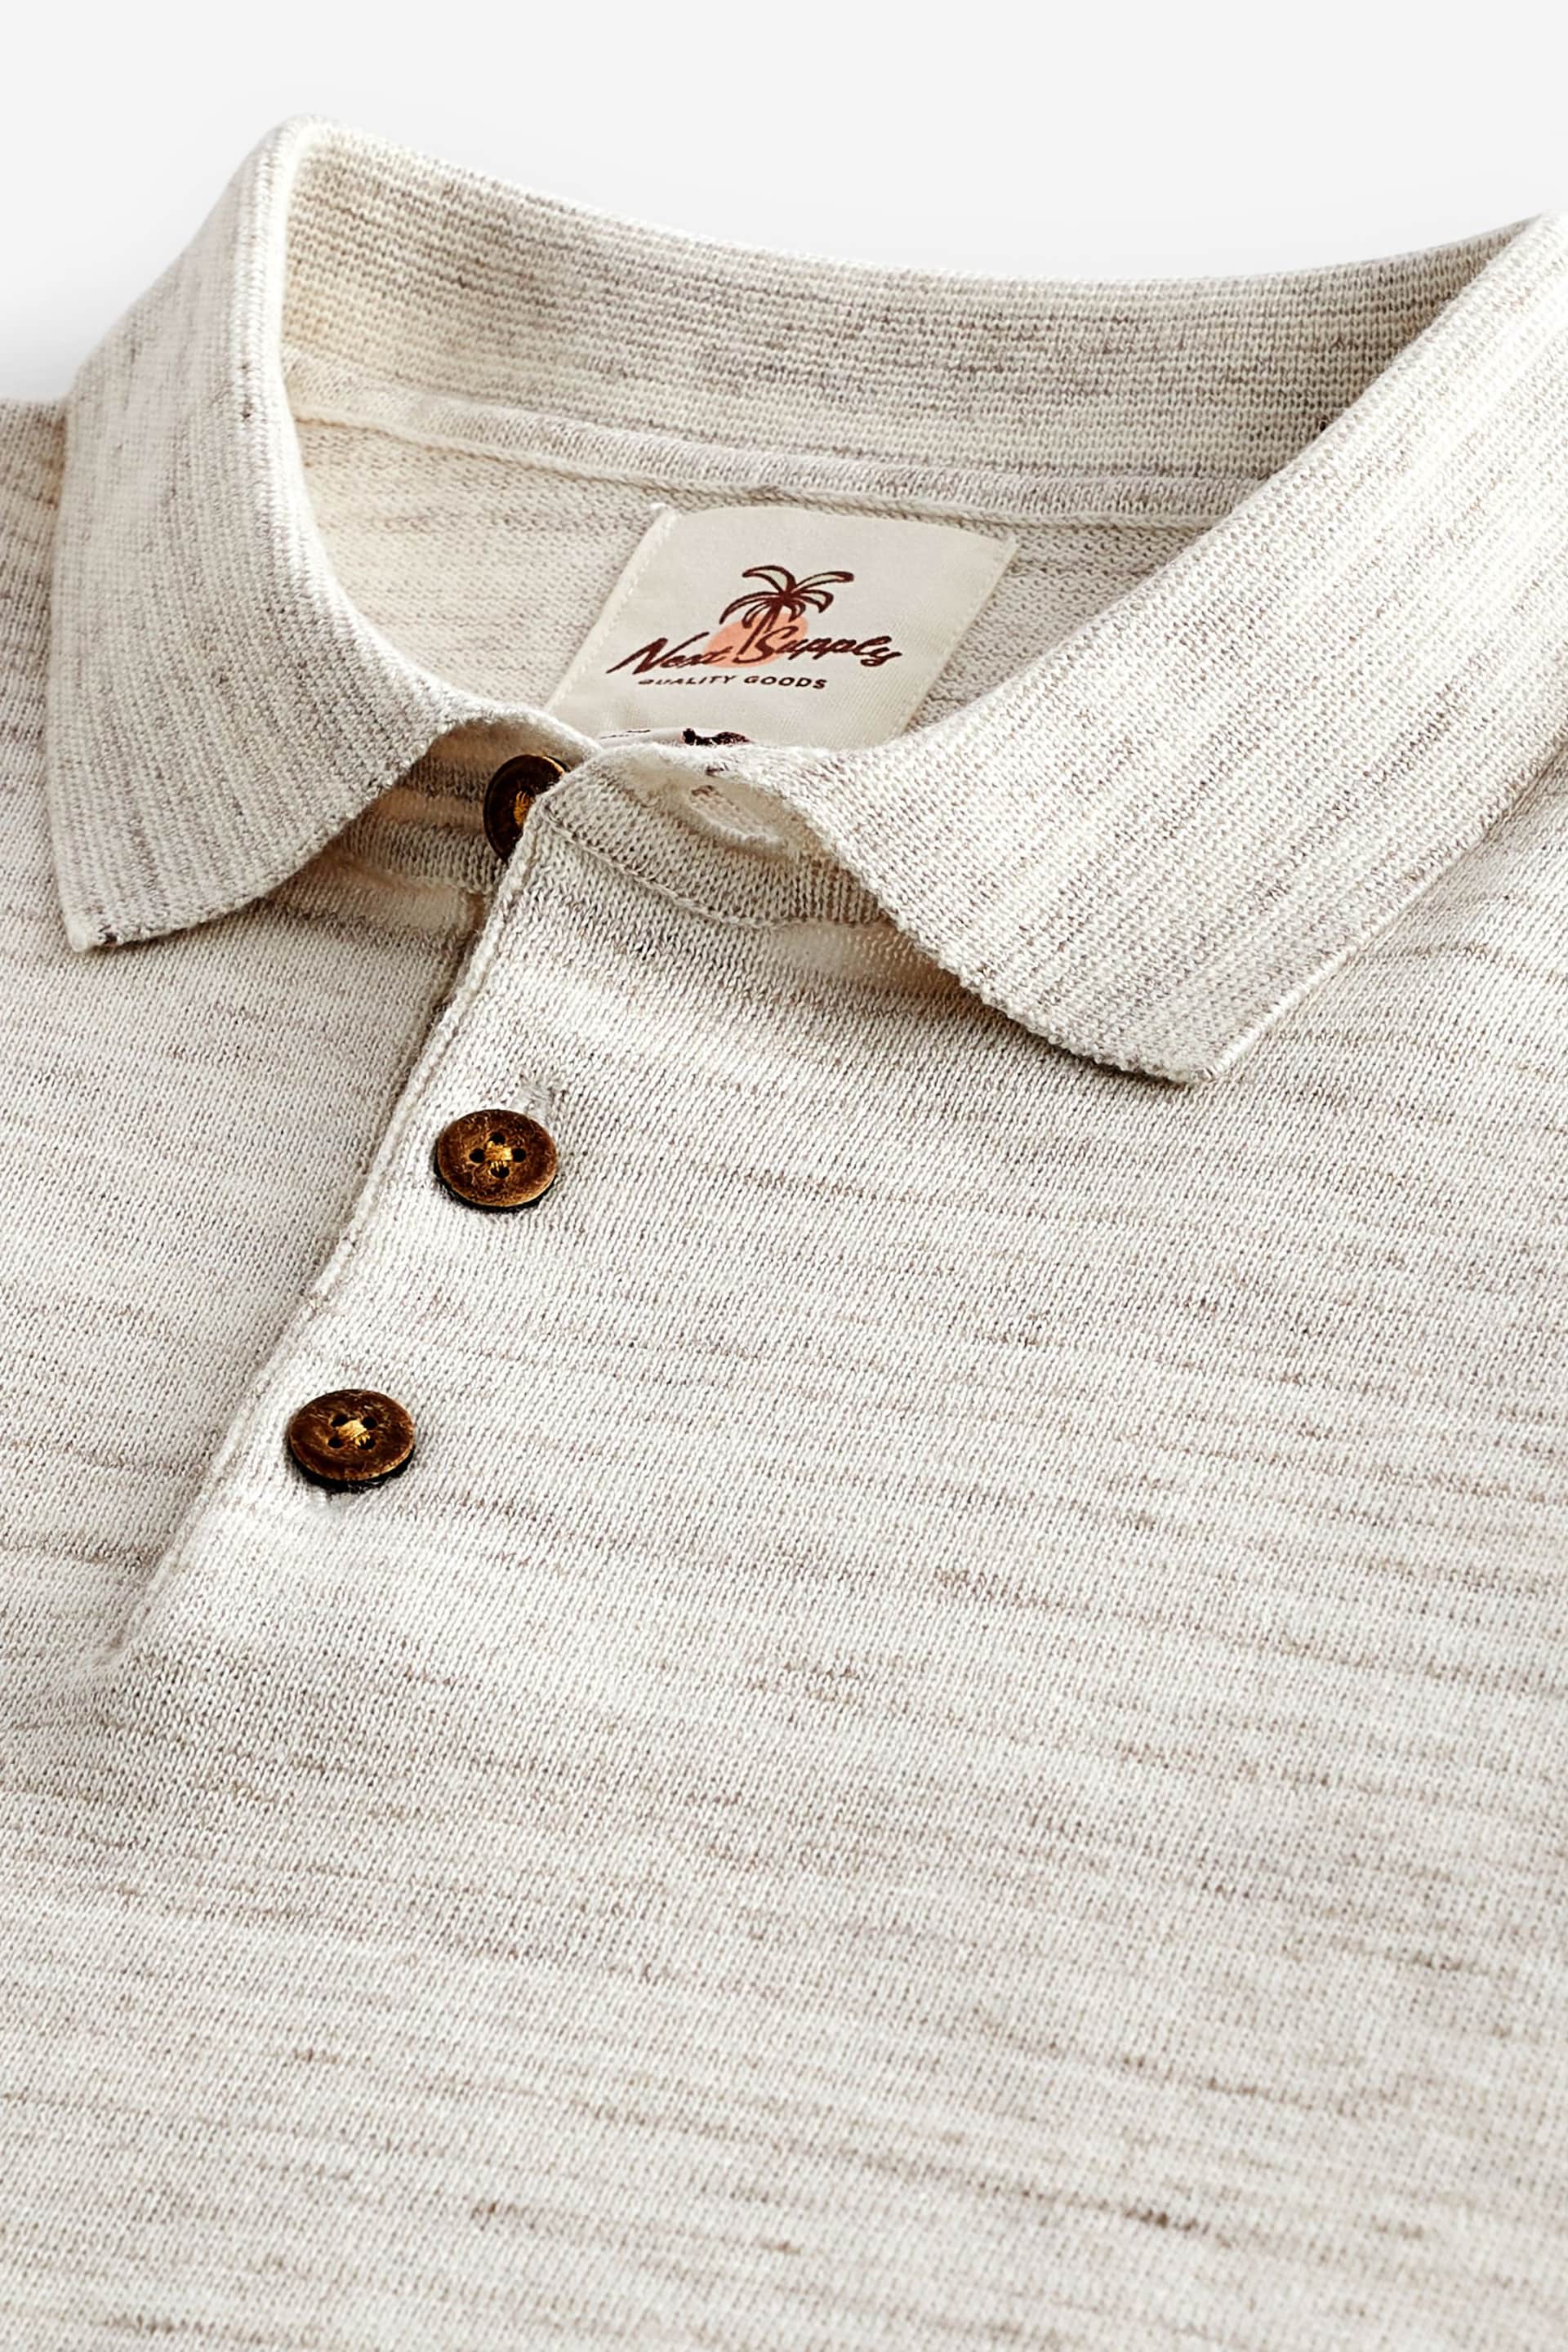 Natural Linen Blend Knitted Polo Shirt - Image 6 of 7